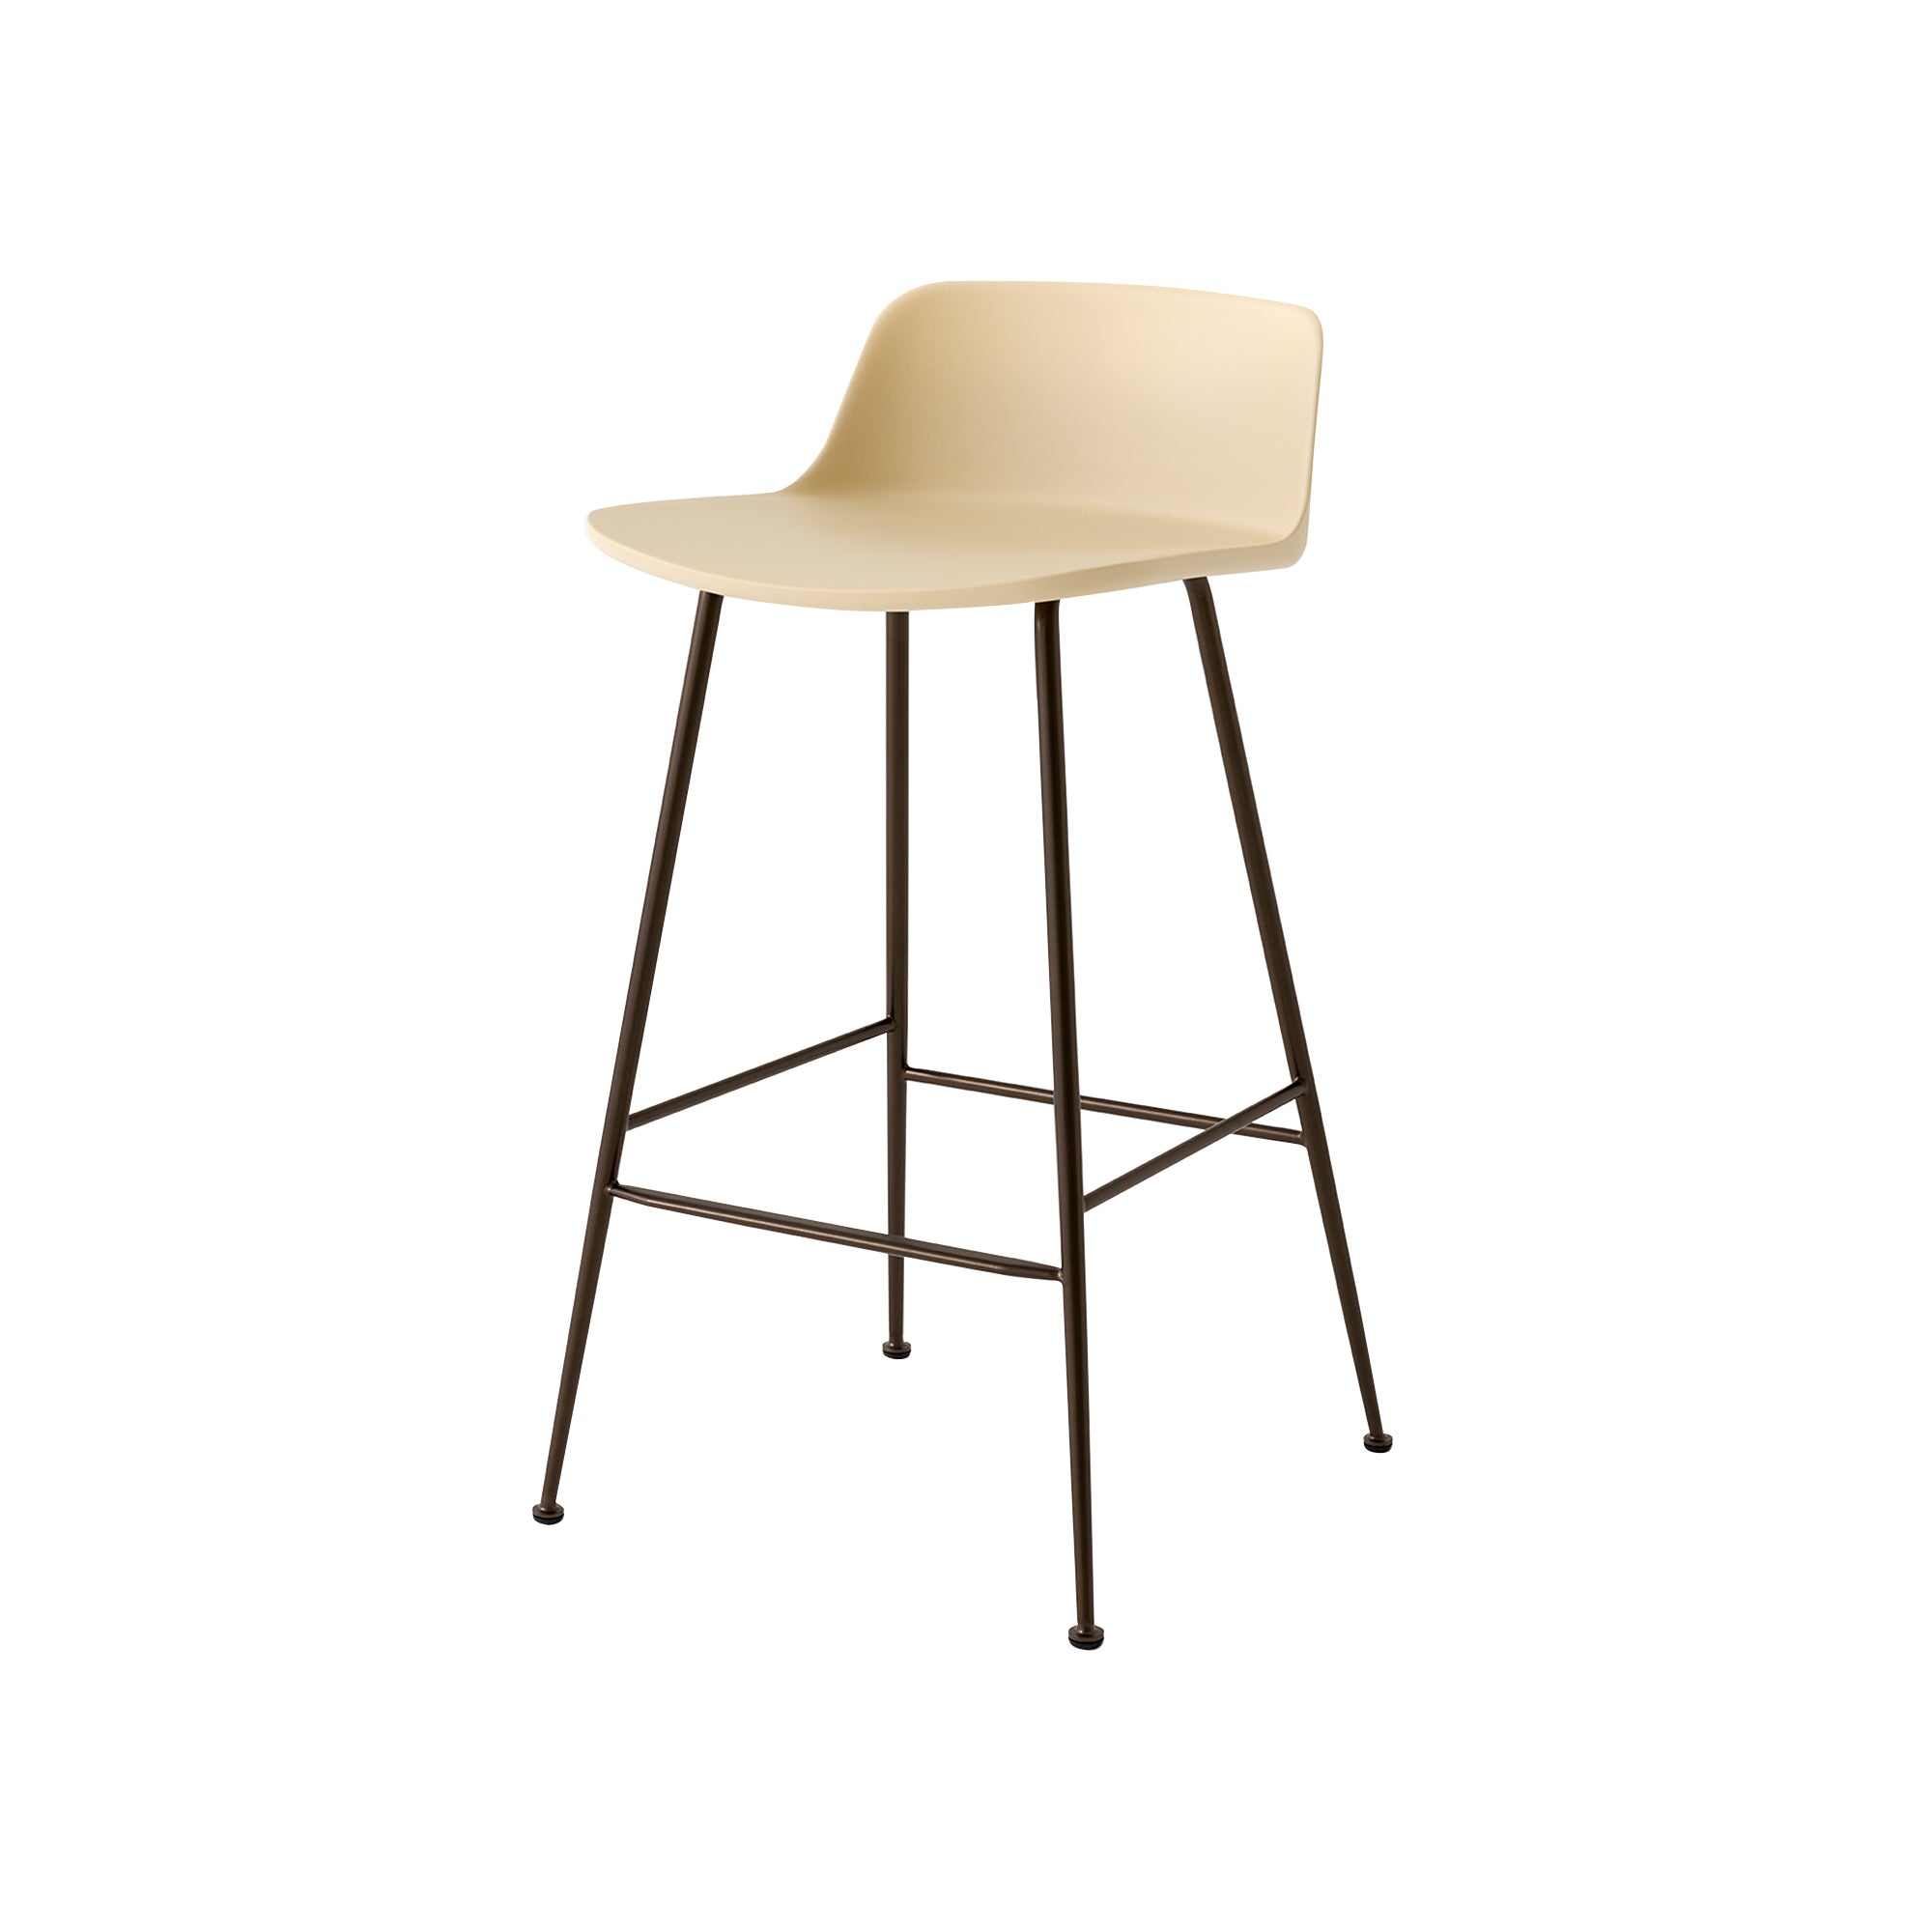 Rely Bar + Counter Lowback Stool: HW81 + HW86 + Counter (HW81) + Beige Sand + Bronzed